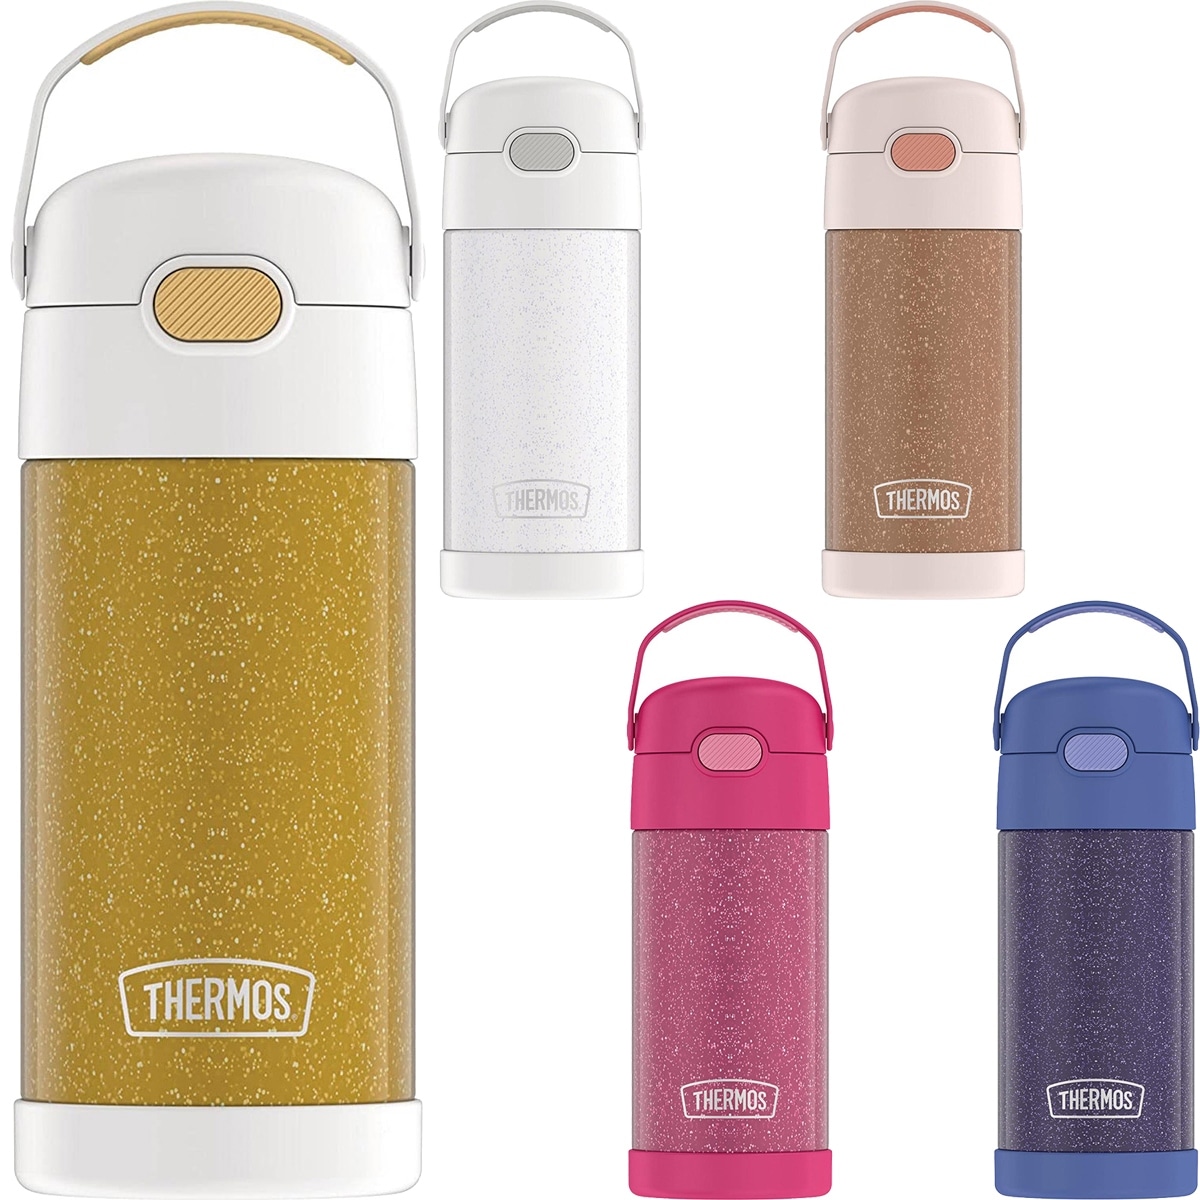 https://ak1.ostkcdn.com/images/products/is/images/direct/ff82070209eff9b9ceeef77919b7e533cd2658fe/Thermos-12-oz.-Kid%27s-Glitter-Funtainer-Stainless-Steel-Water-Bottle.jpg